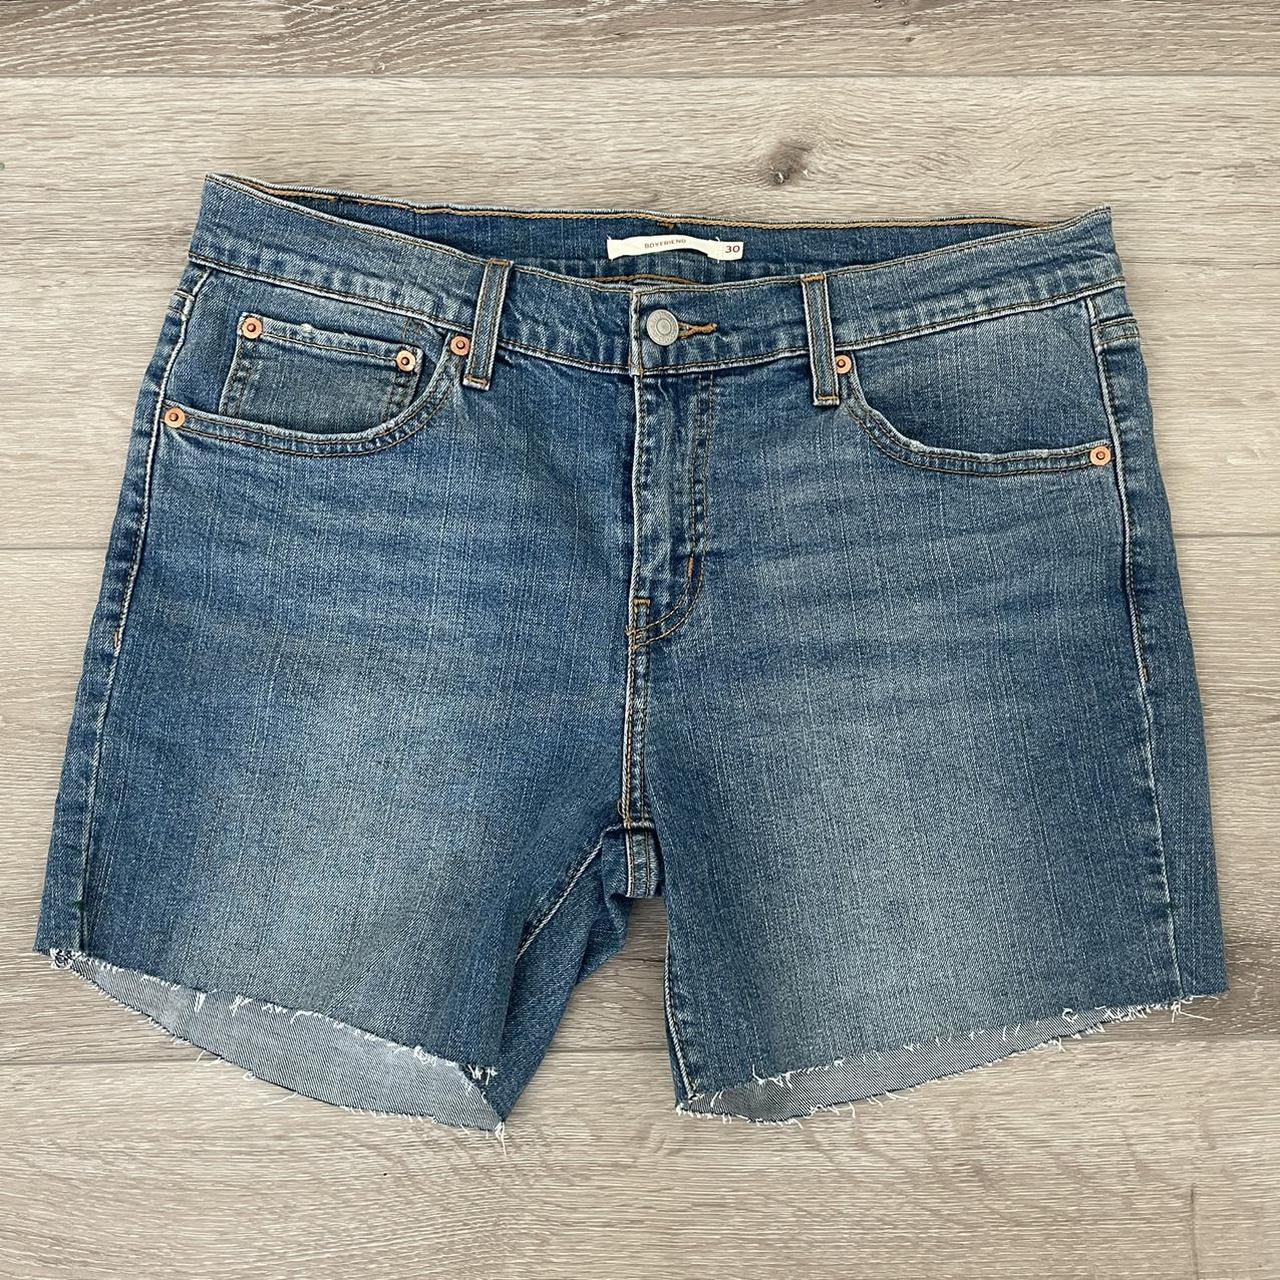 Levi’s Boyfriend Shorts 🎬 so wearable and cute! only... - Depop